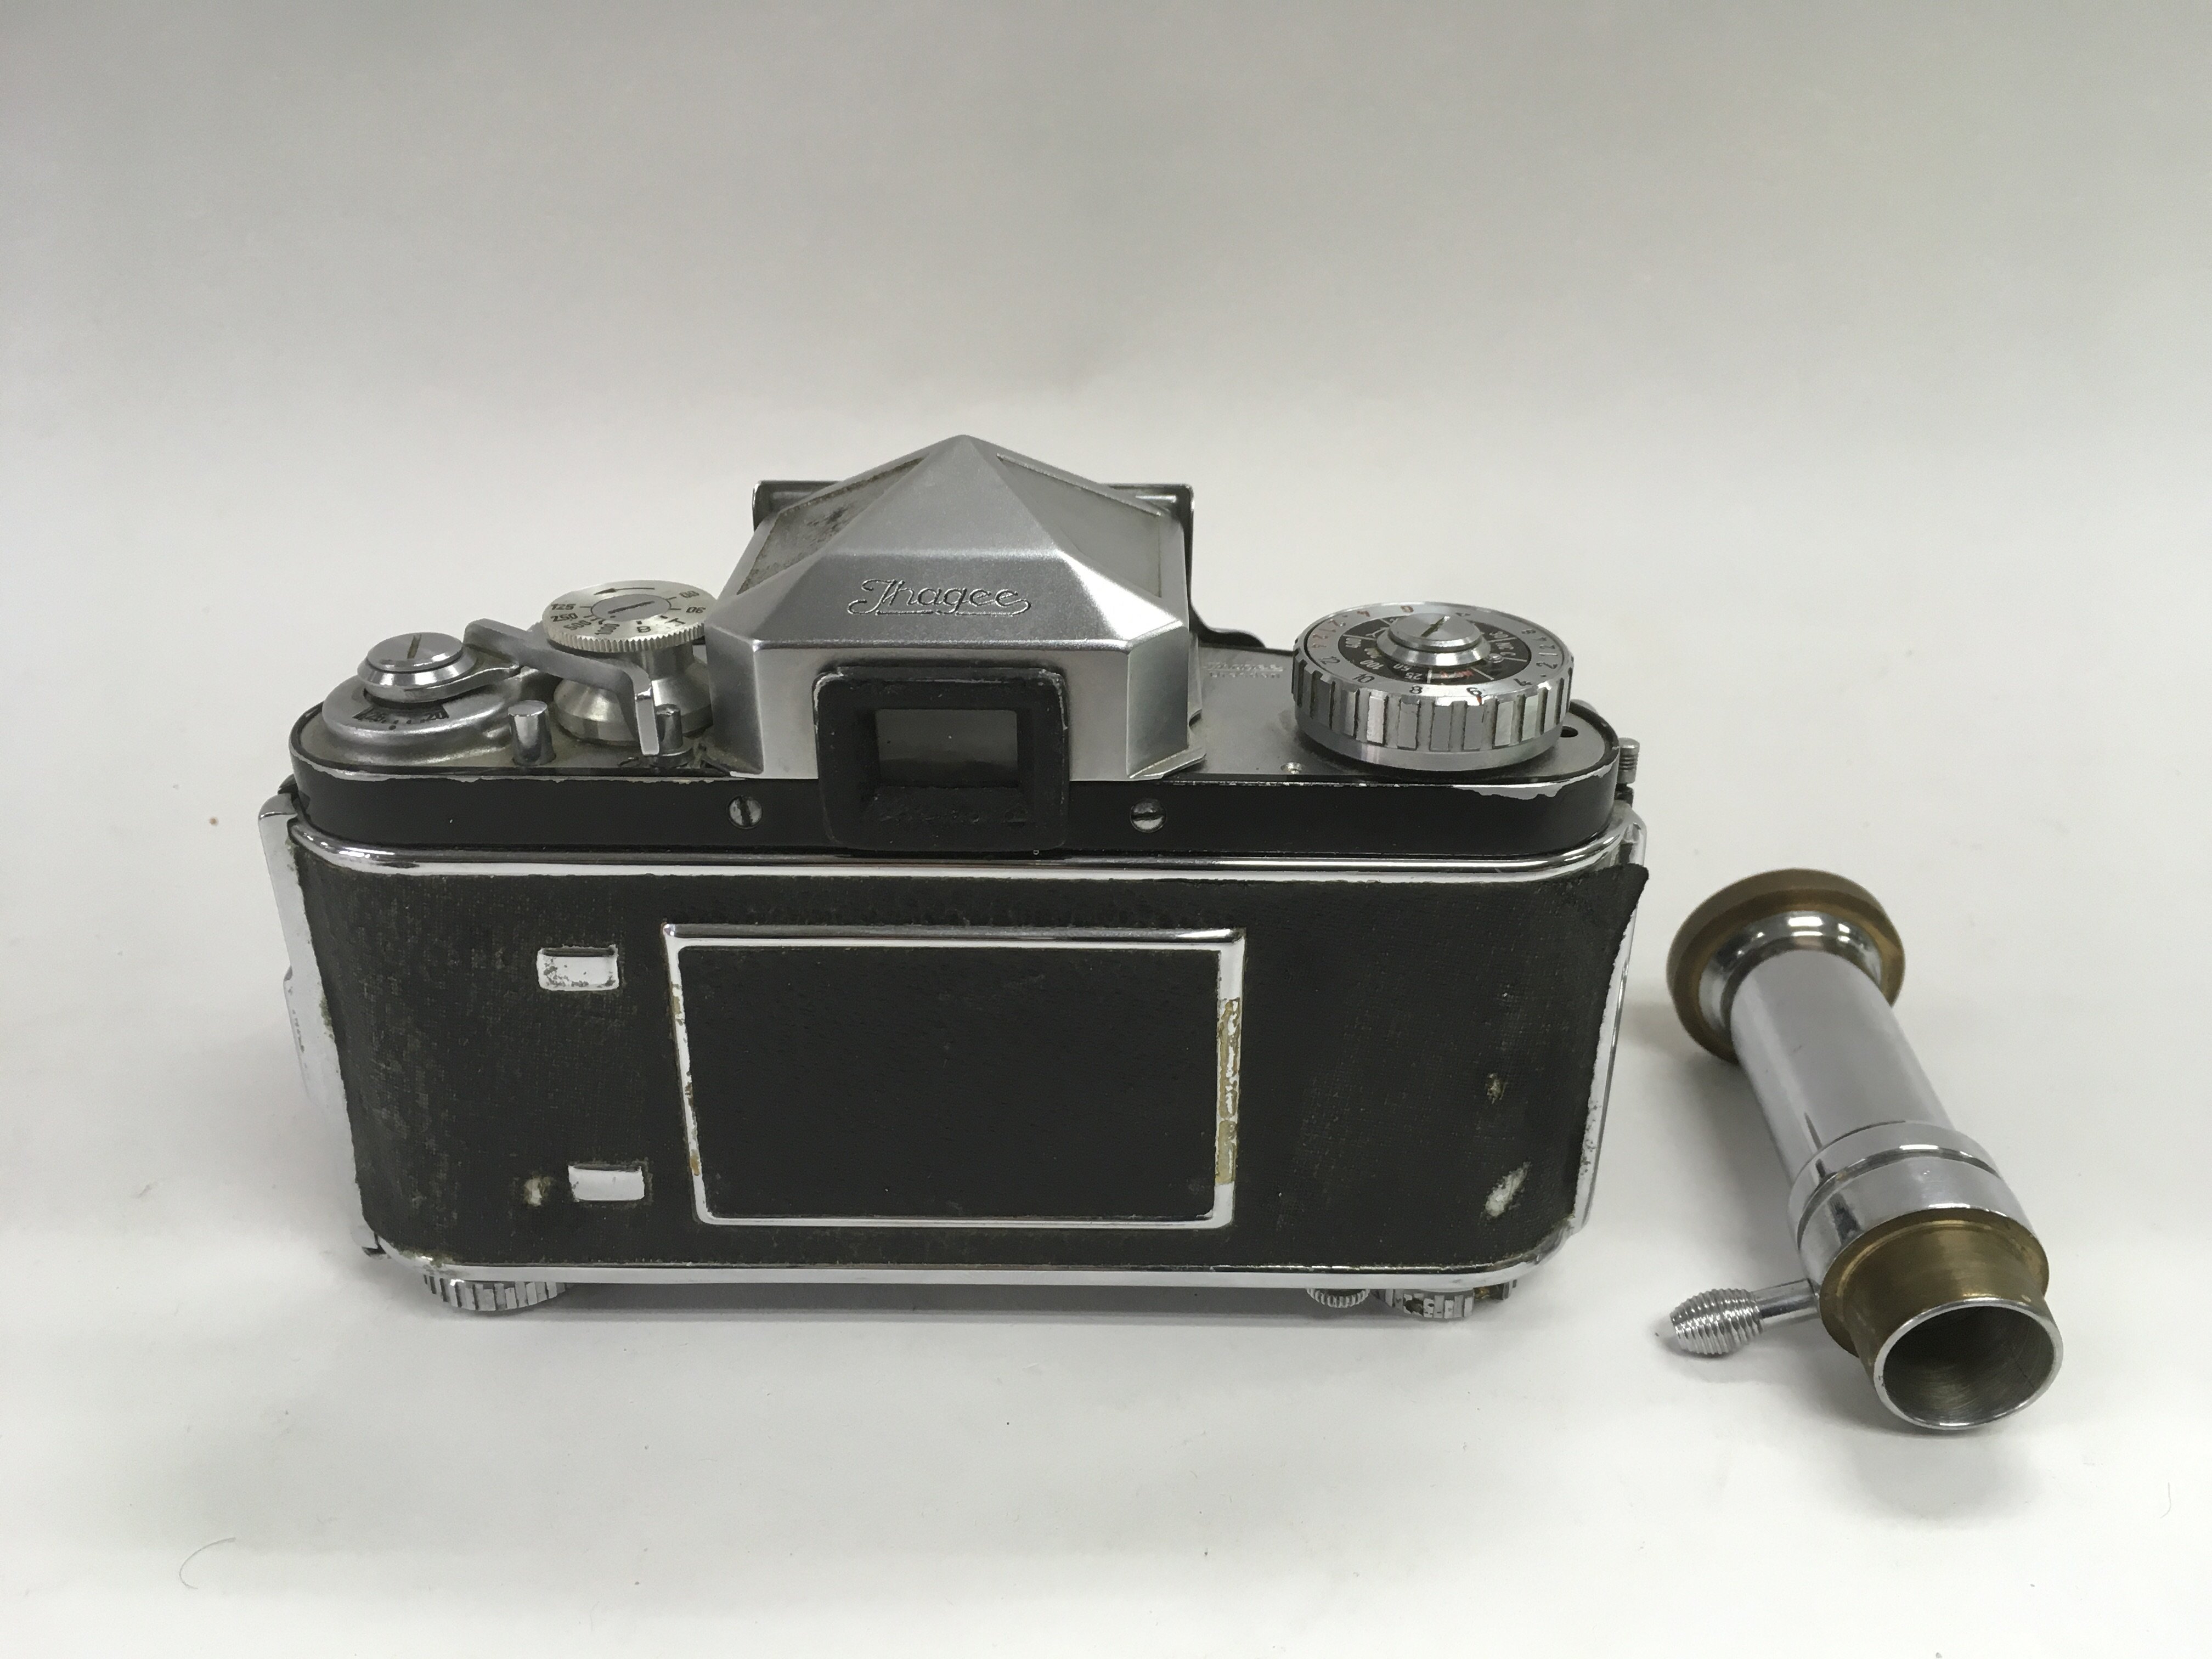 An Exacta camera with an unusual high resolution l - Image 2 of 2